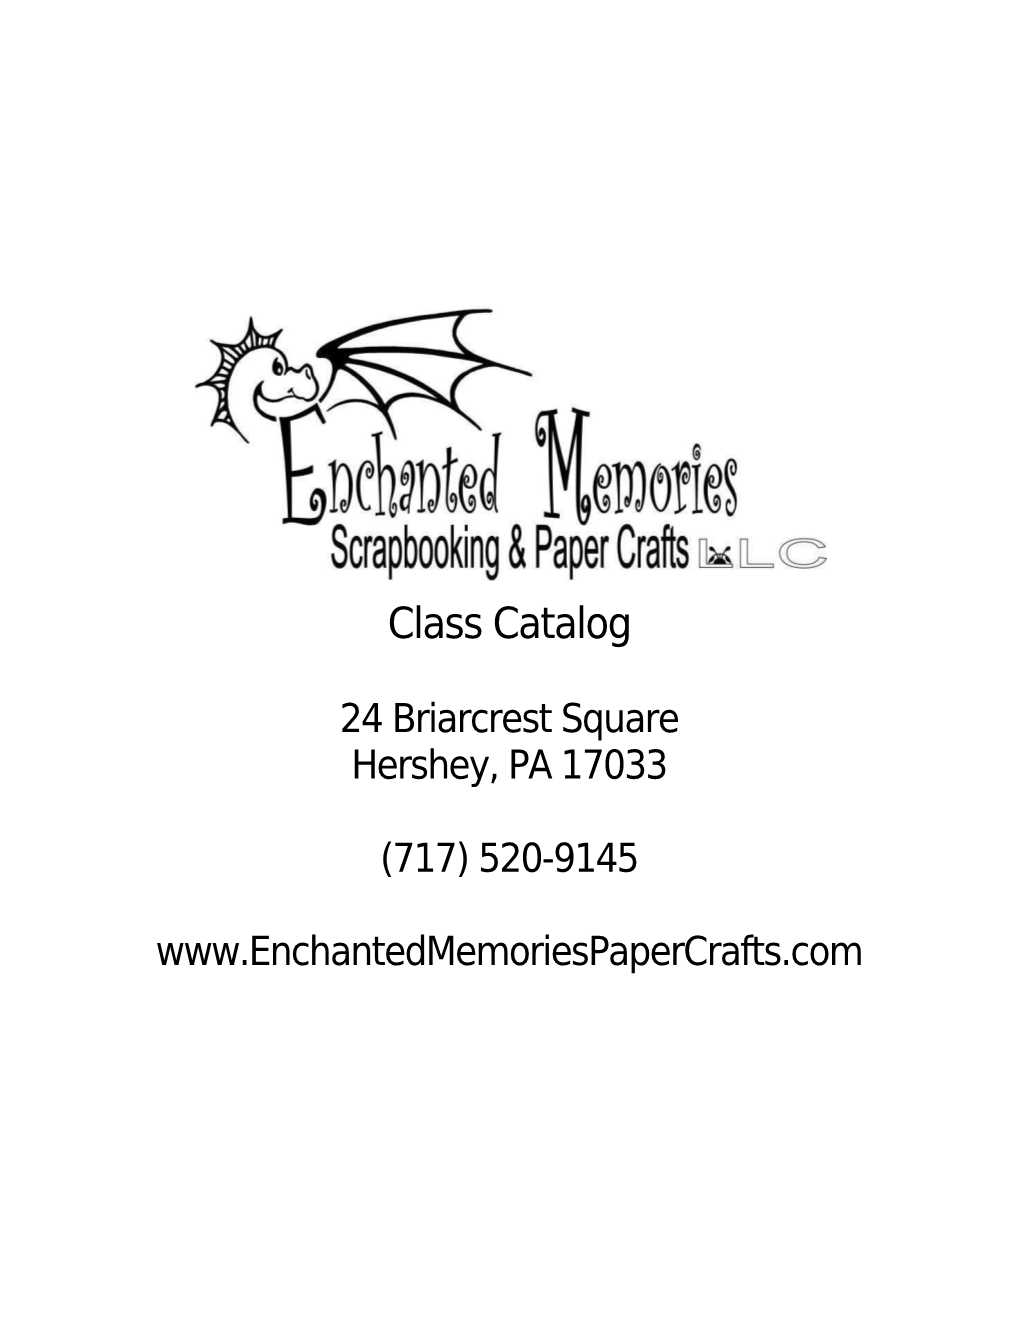 Welcome to the Enchanted Memories Class Catalog